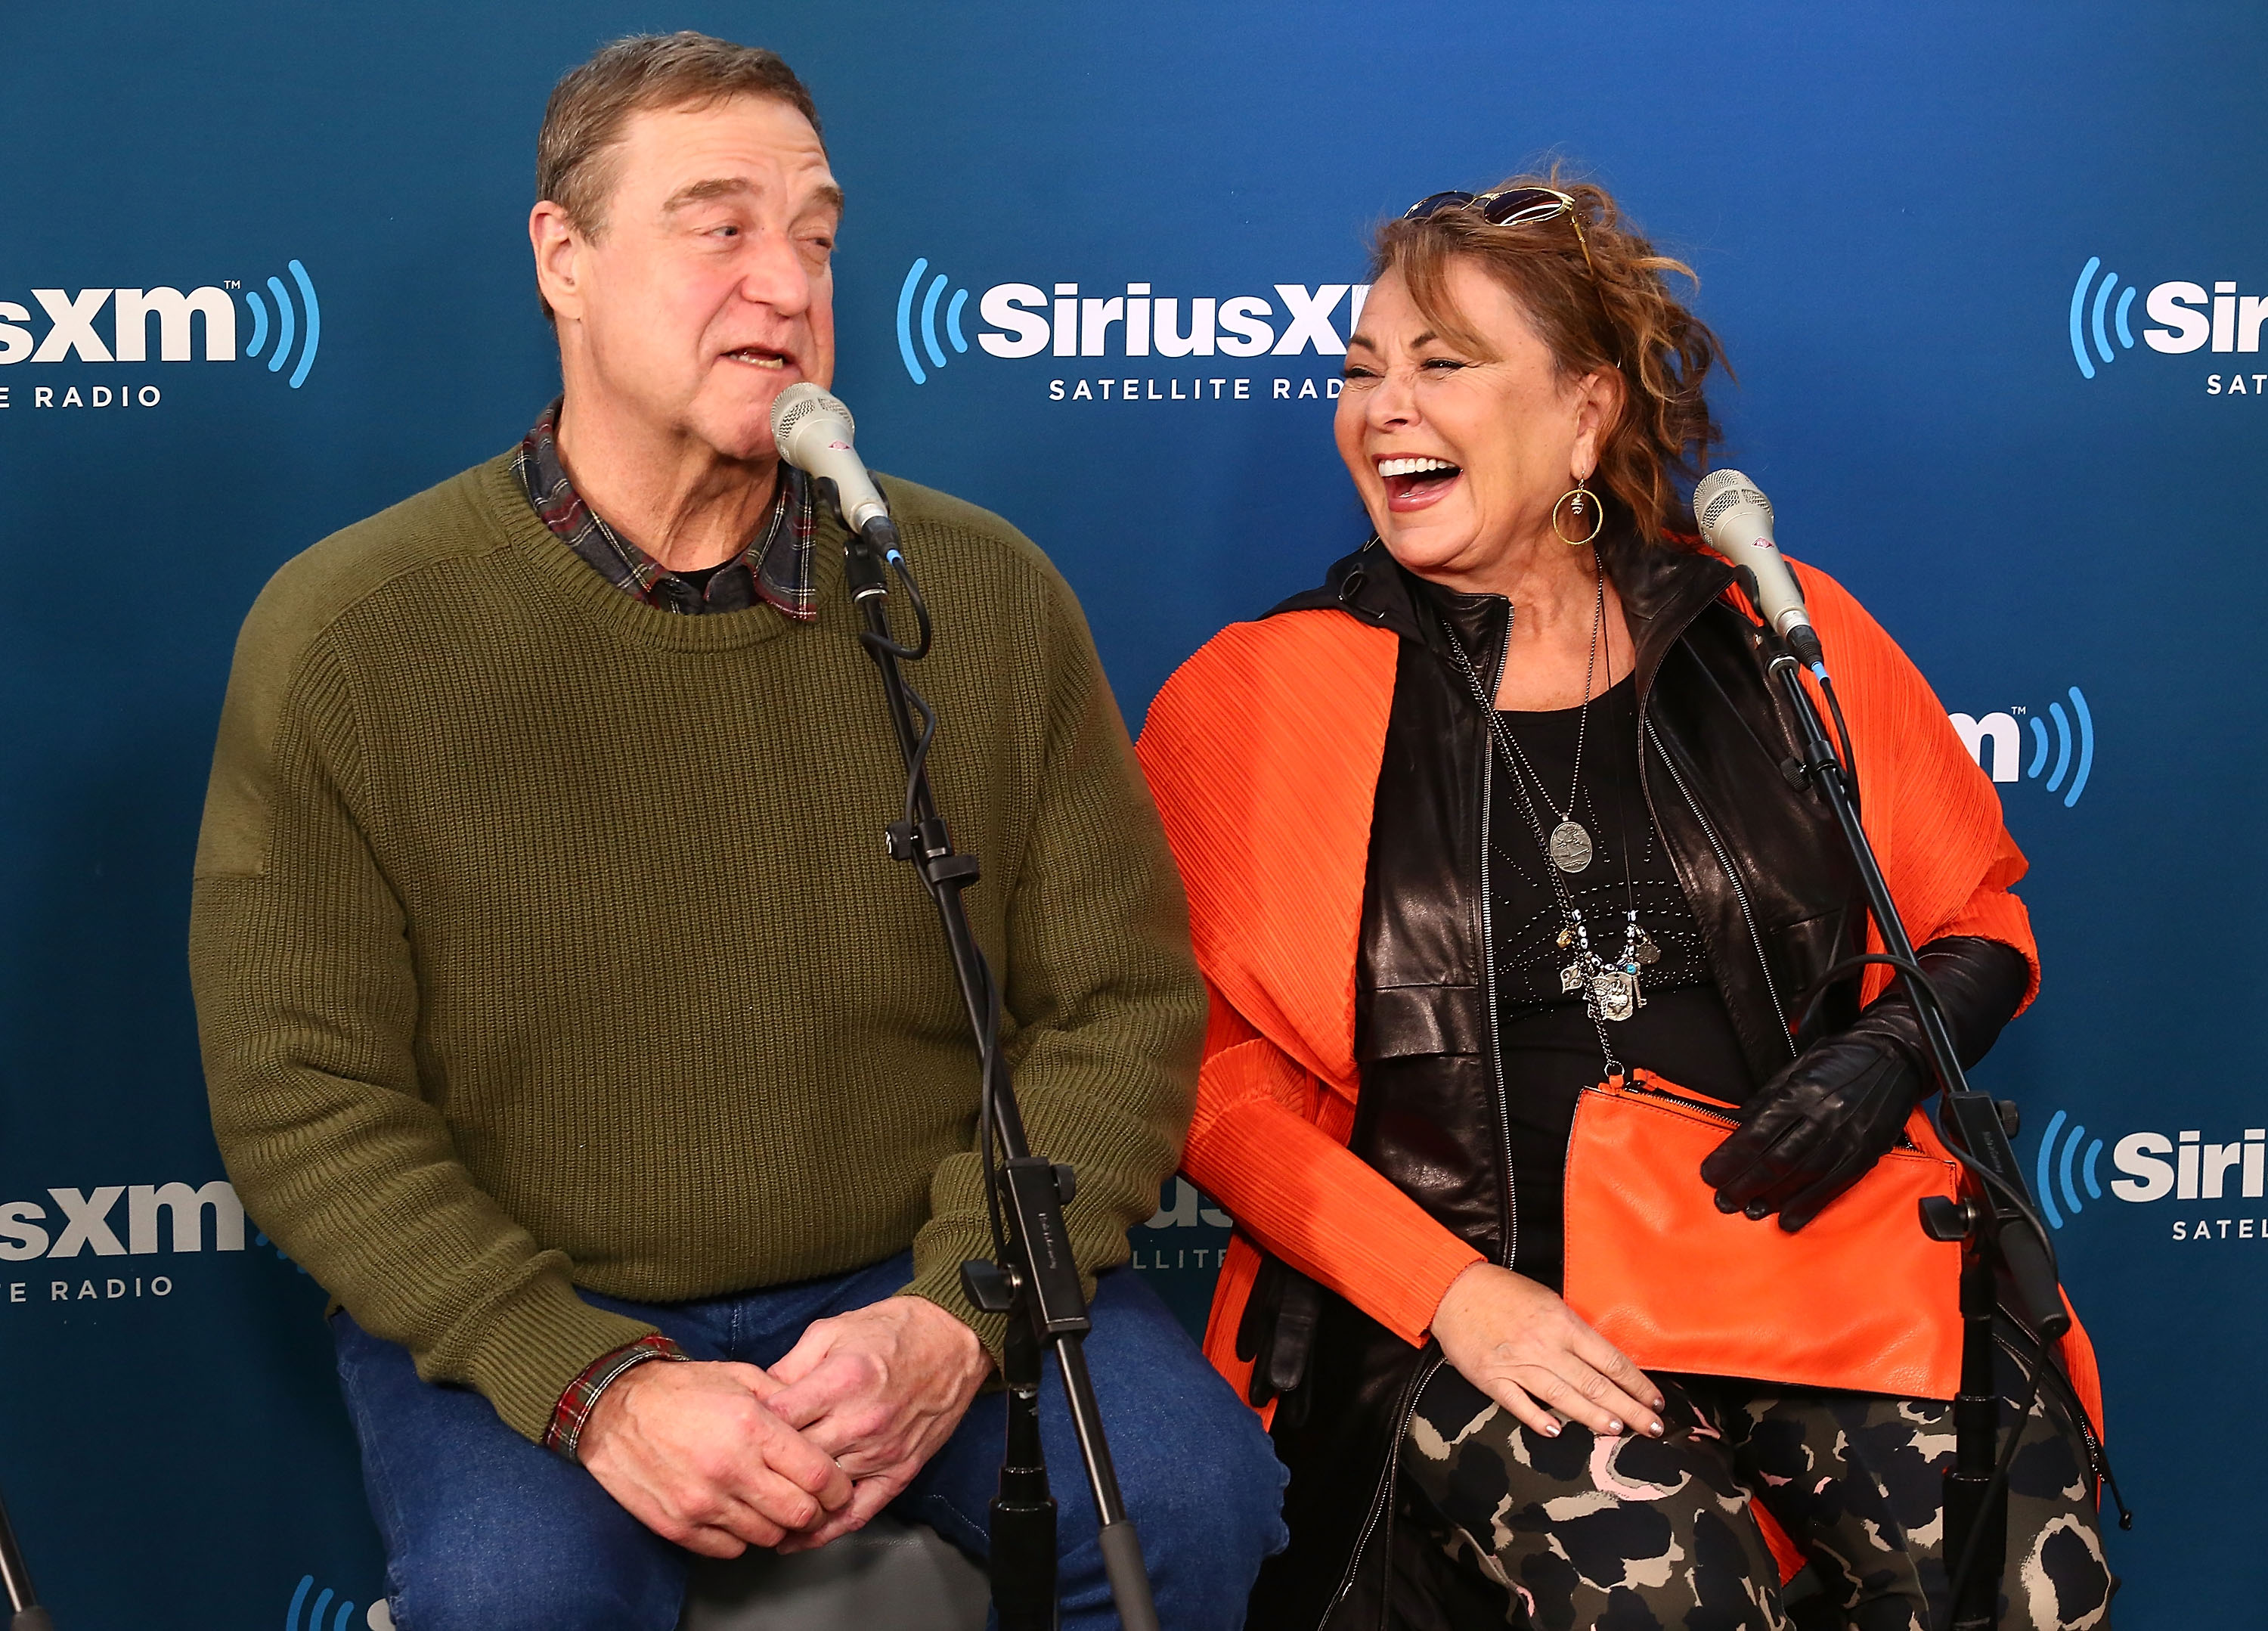 John Goodman and Roseanne Barr on March 27, 2018 in New York City. | Source: Getty Images